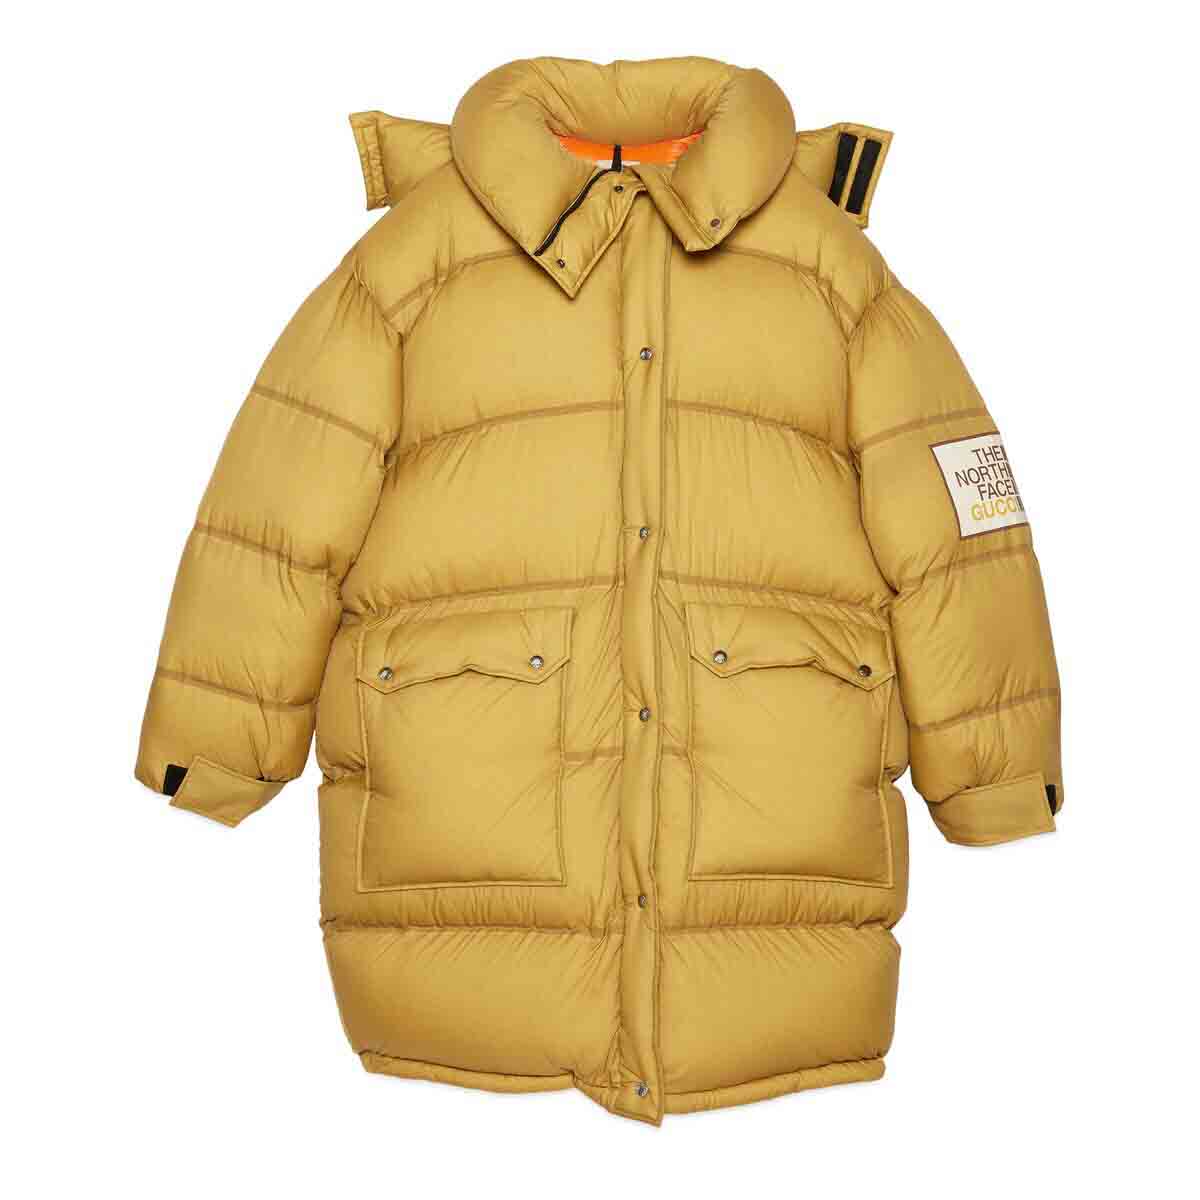 Gucci x The North Face Padded Jacket Khaki Men's - FW21 - GB